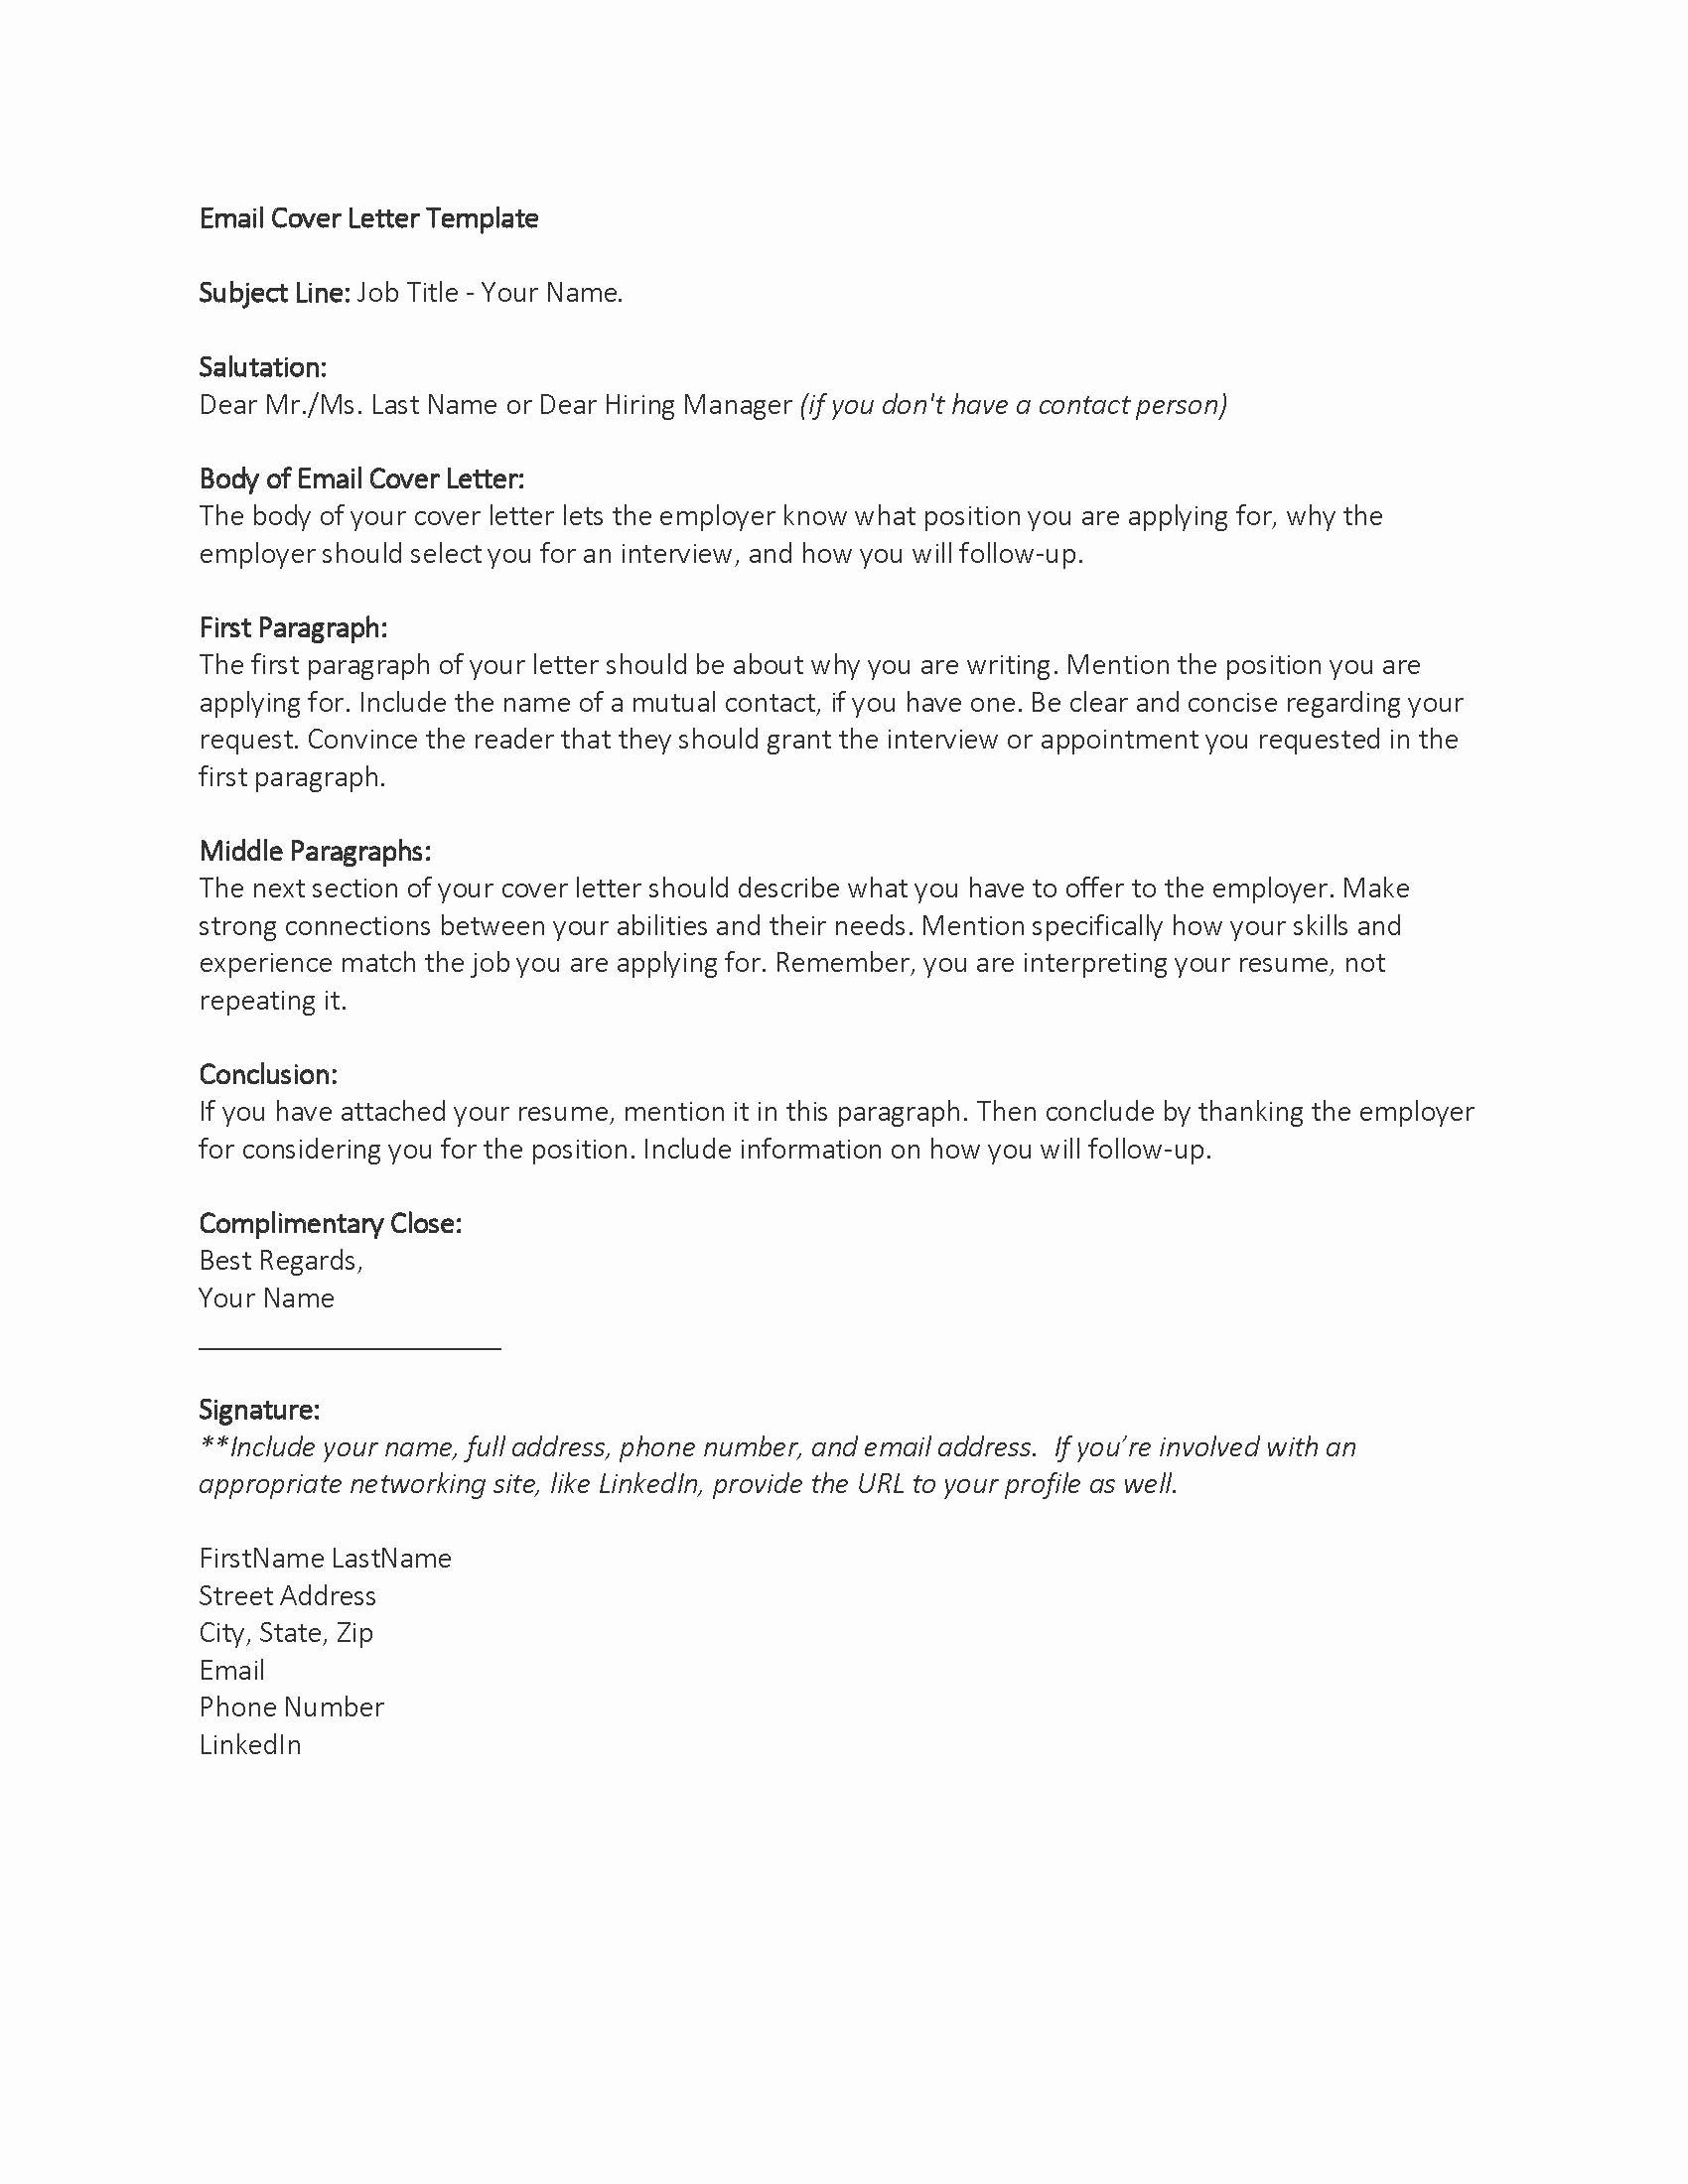 Business Cover Letter format Lovely Emailed Business Cover Letter format Sample